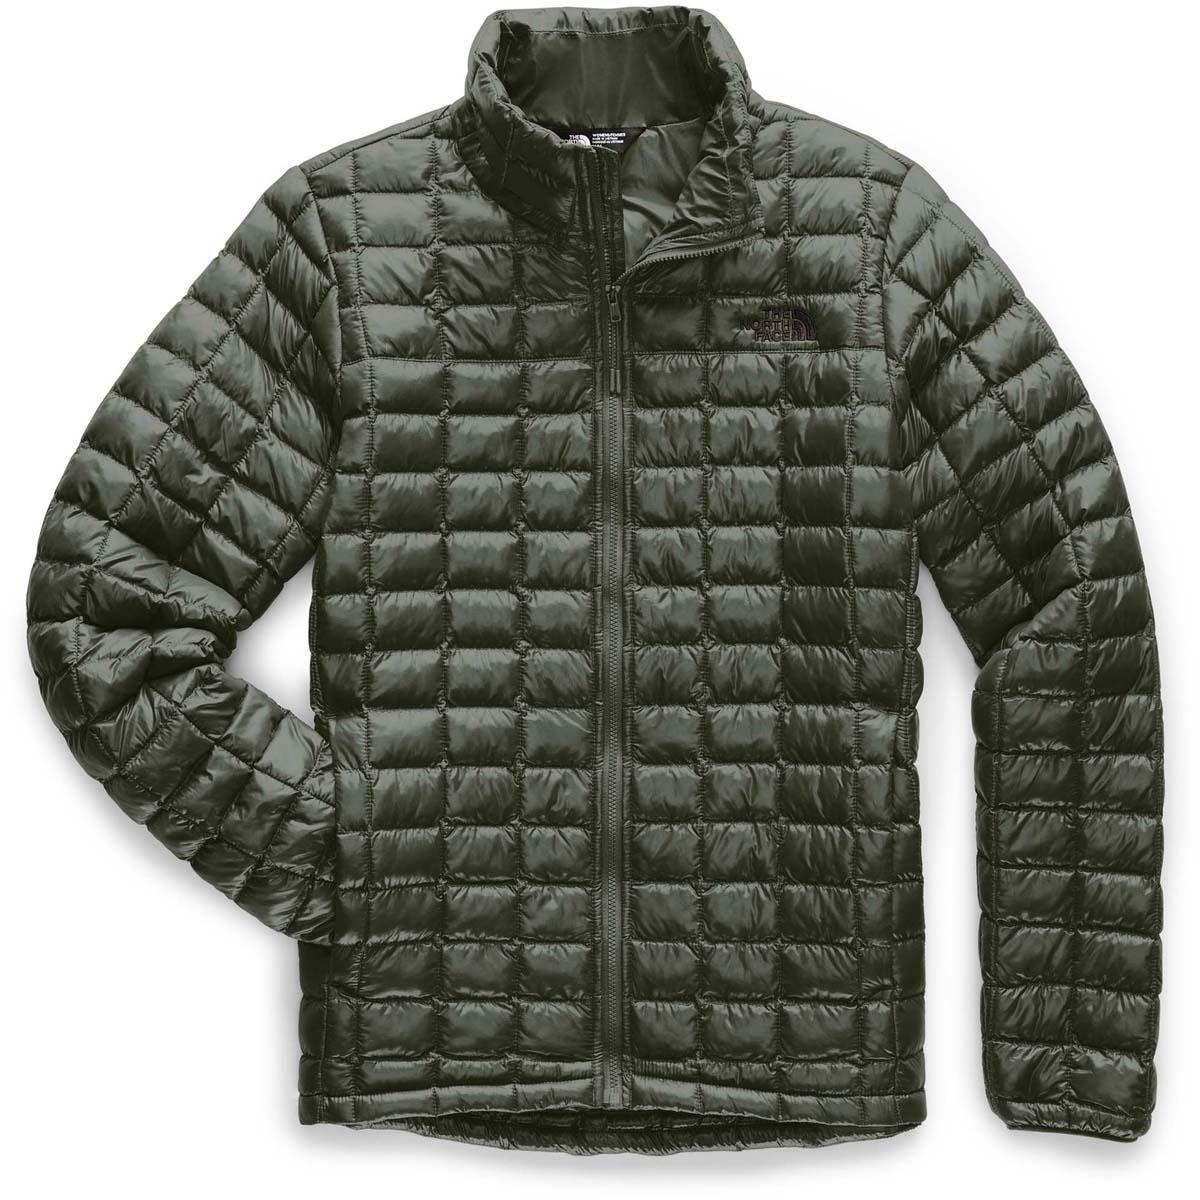 Women The North Face ECO Thermoball Jacket - NF0A3Y3Q